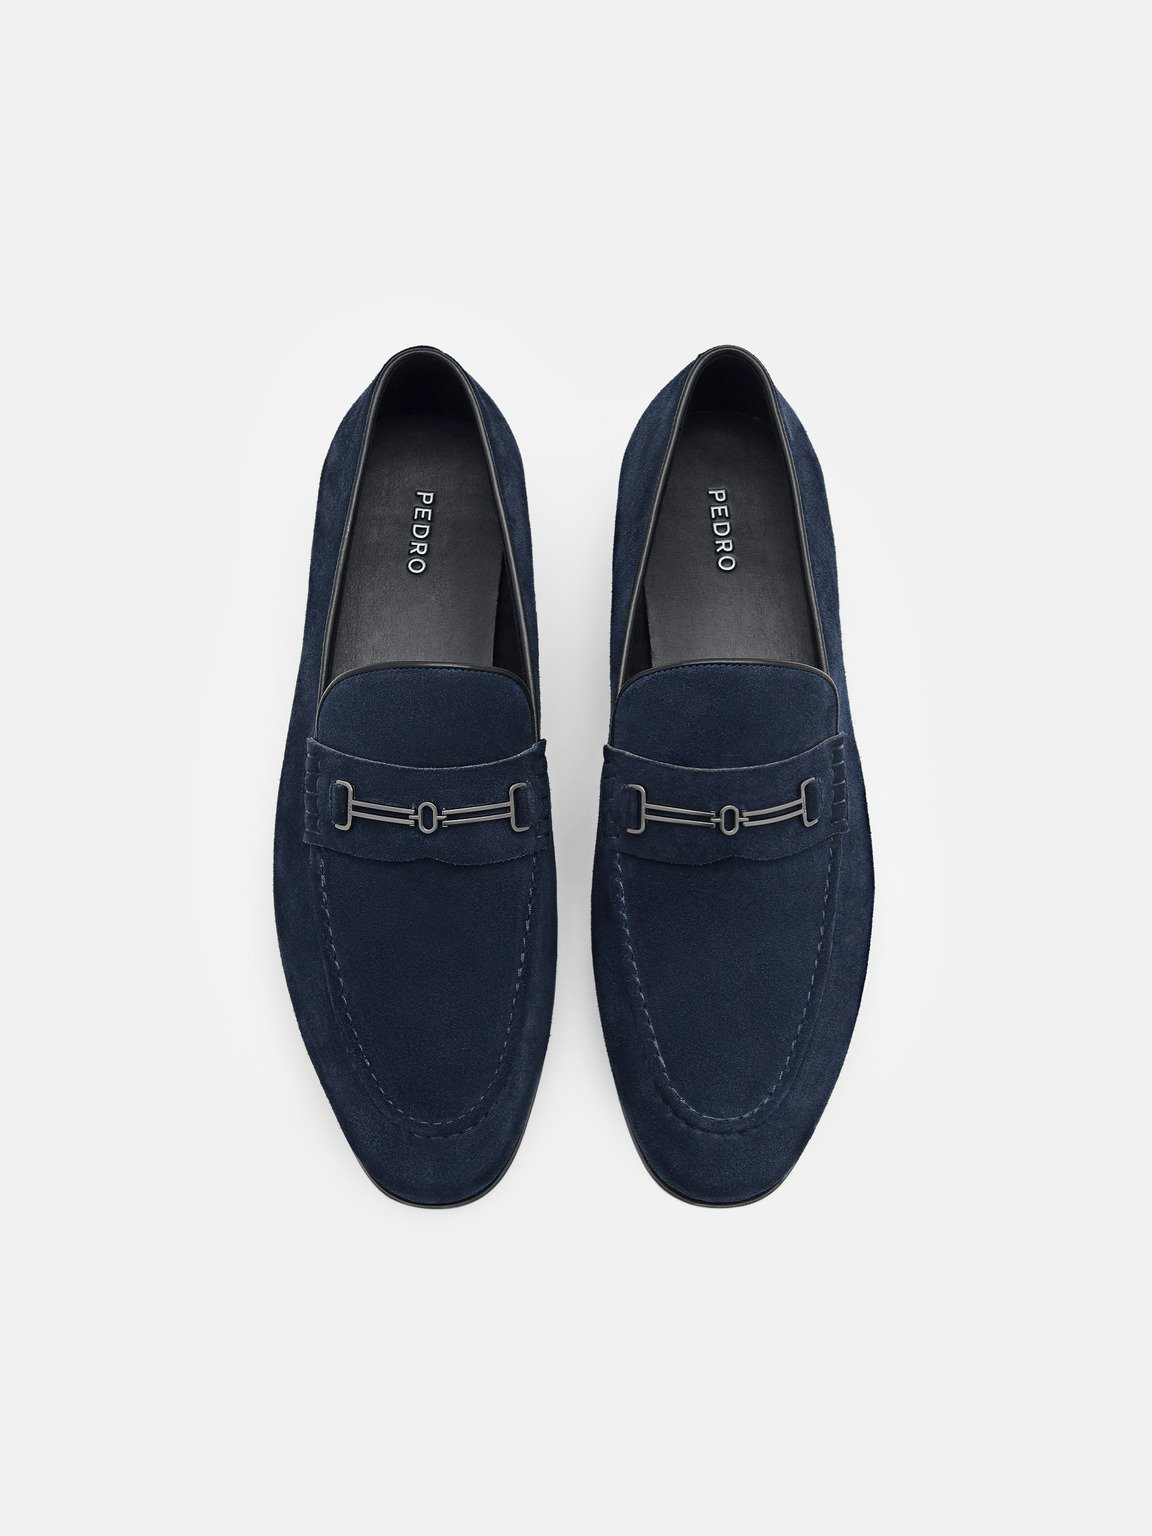 Anthony Leather Loafers, Navy